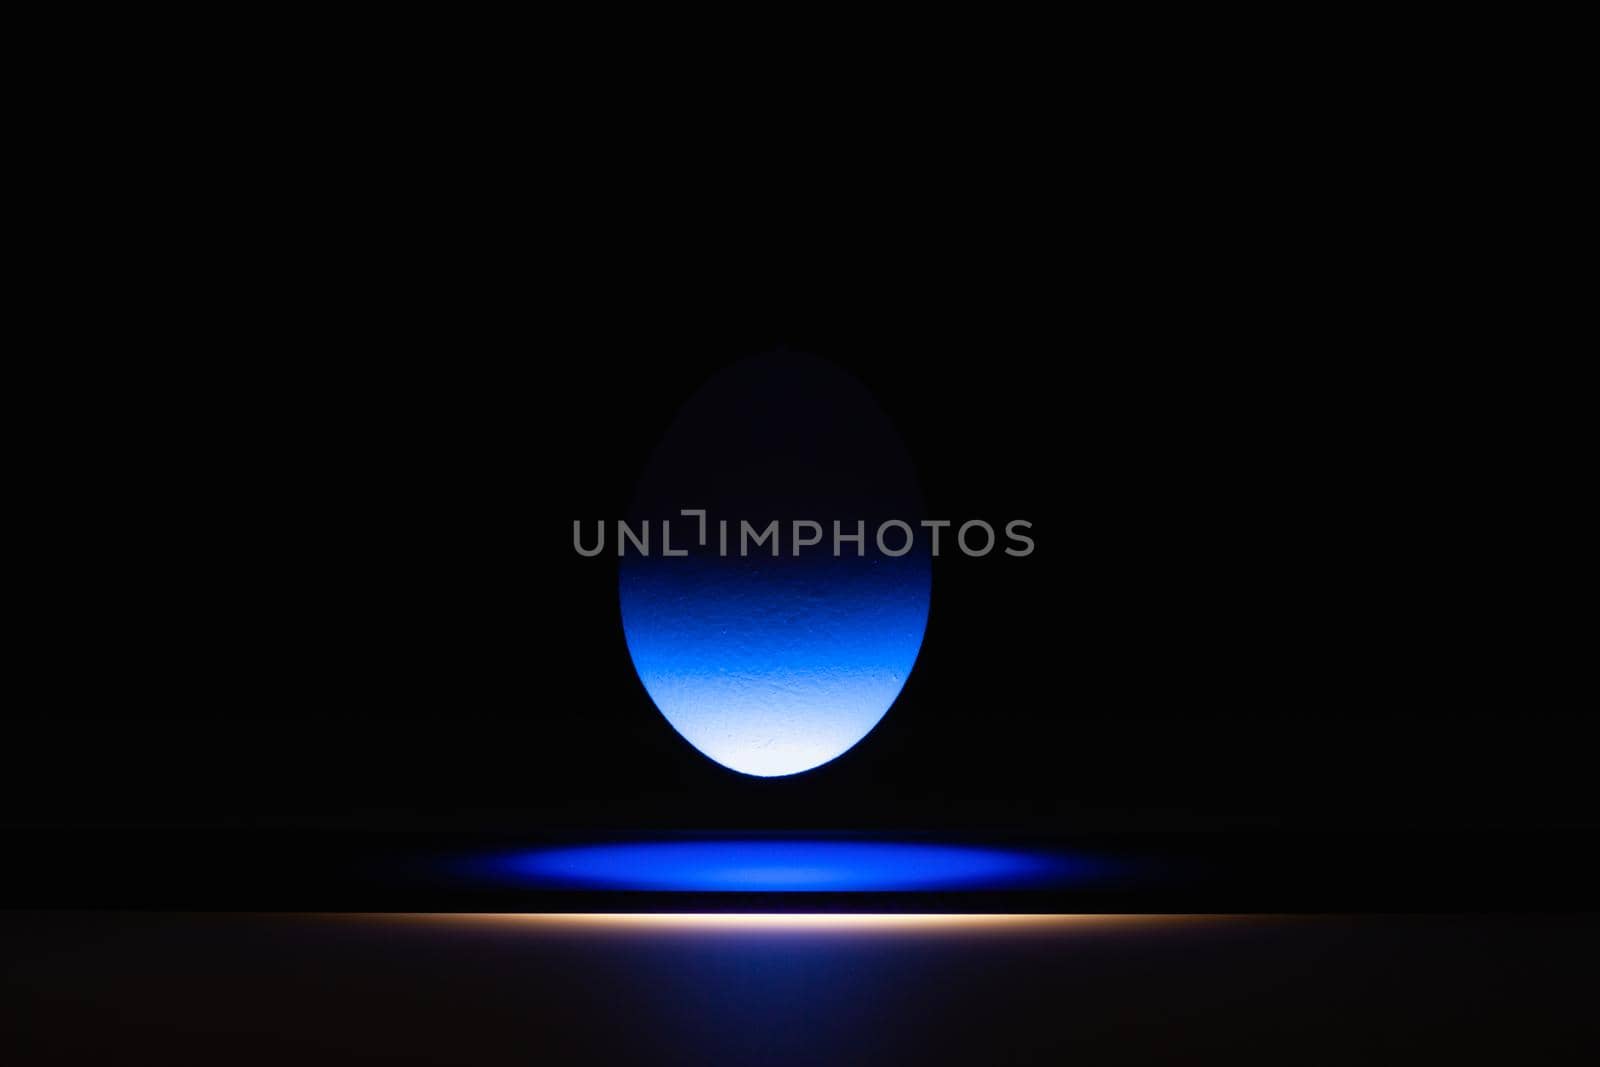 Blue egg levitating over a black glass table in the dark room.